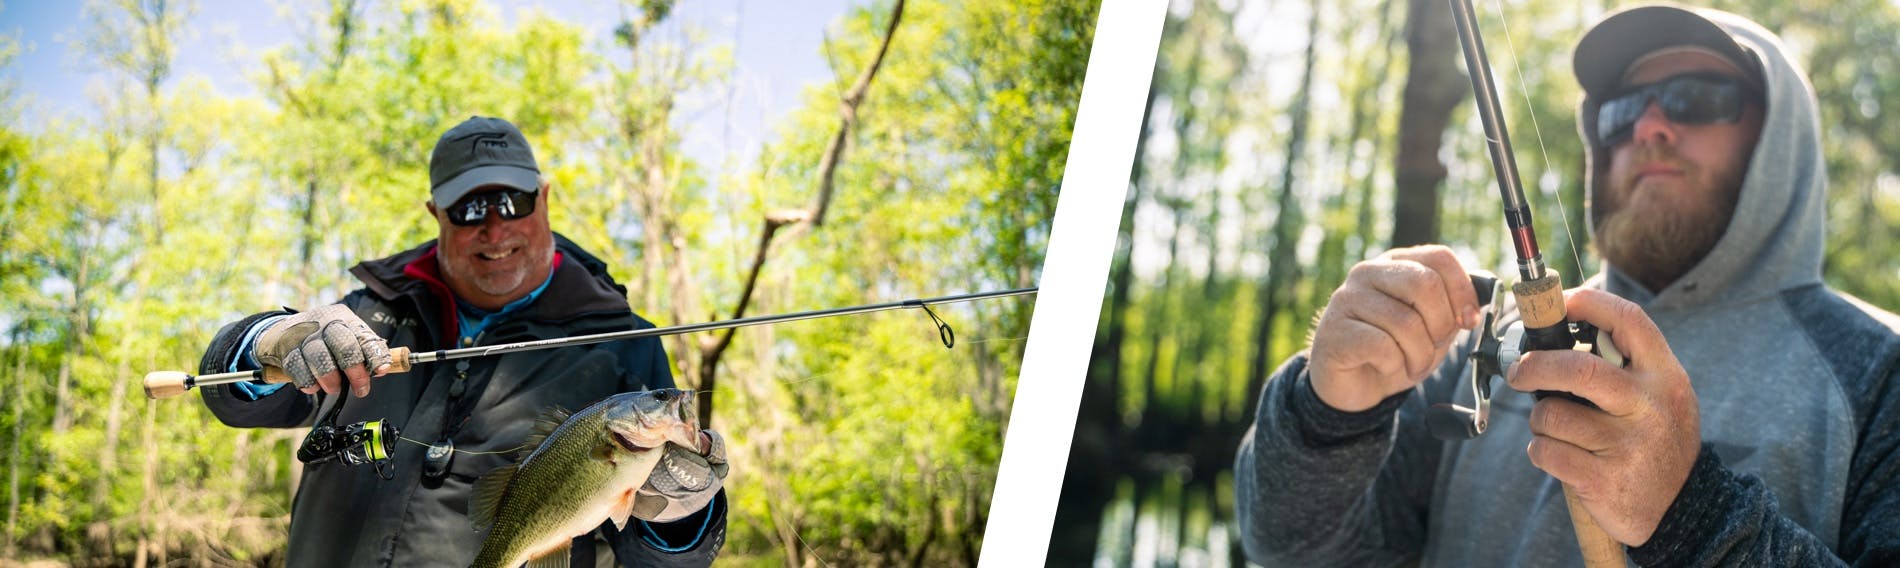 Expert Review: Temple Fork Outfitters Pro 2 Fly Rod